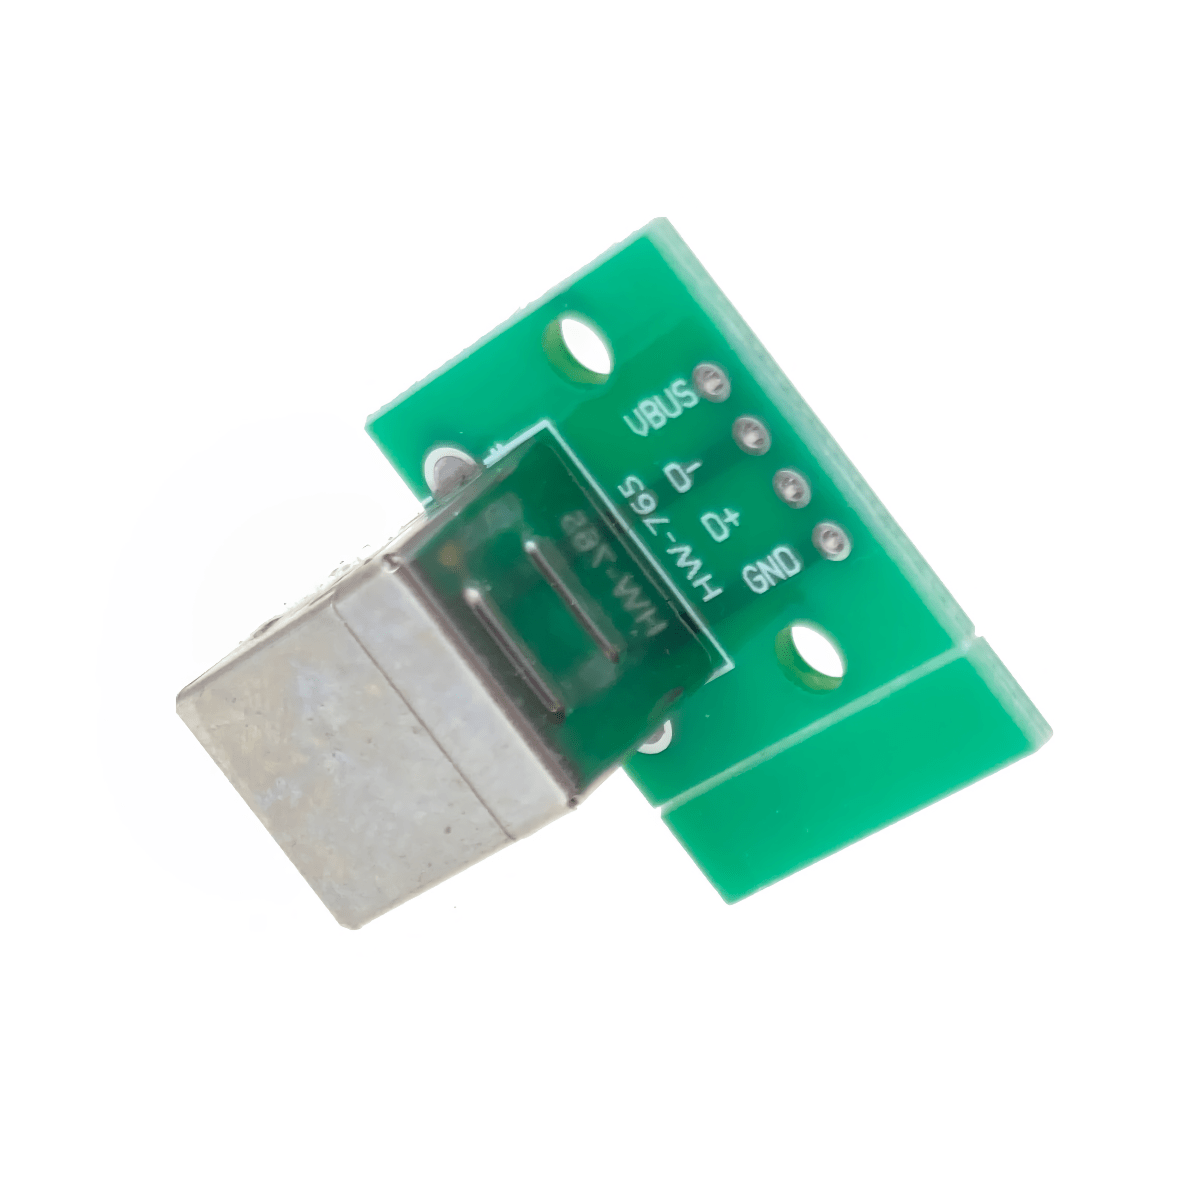 USB Type-B Breakout Board on a white background